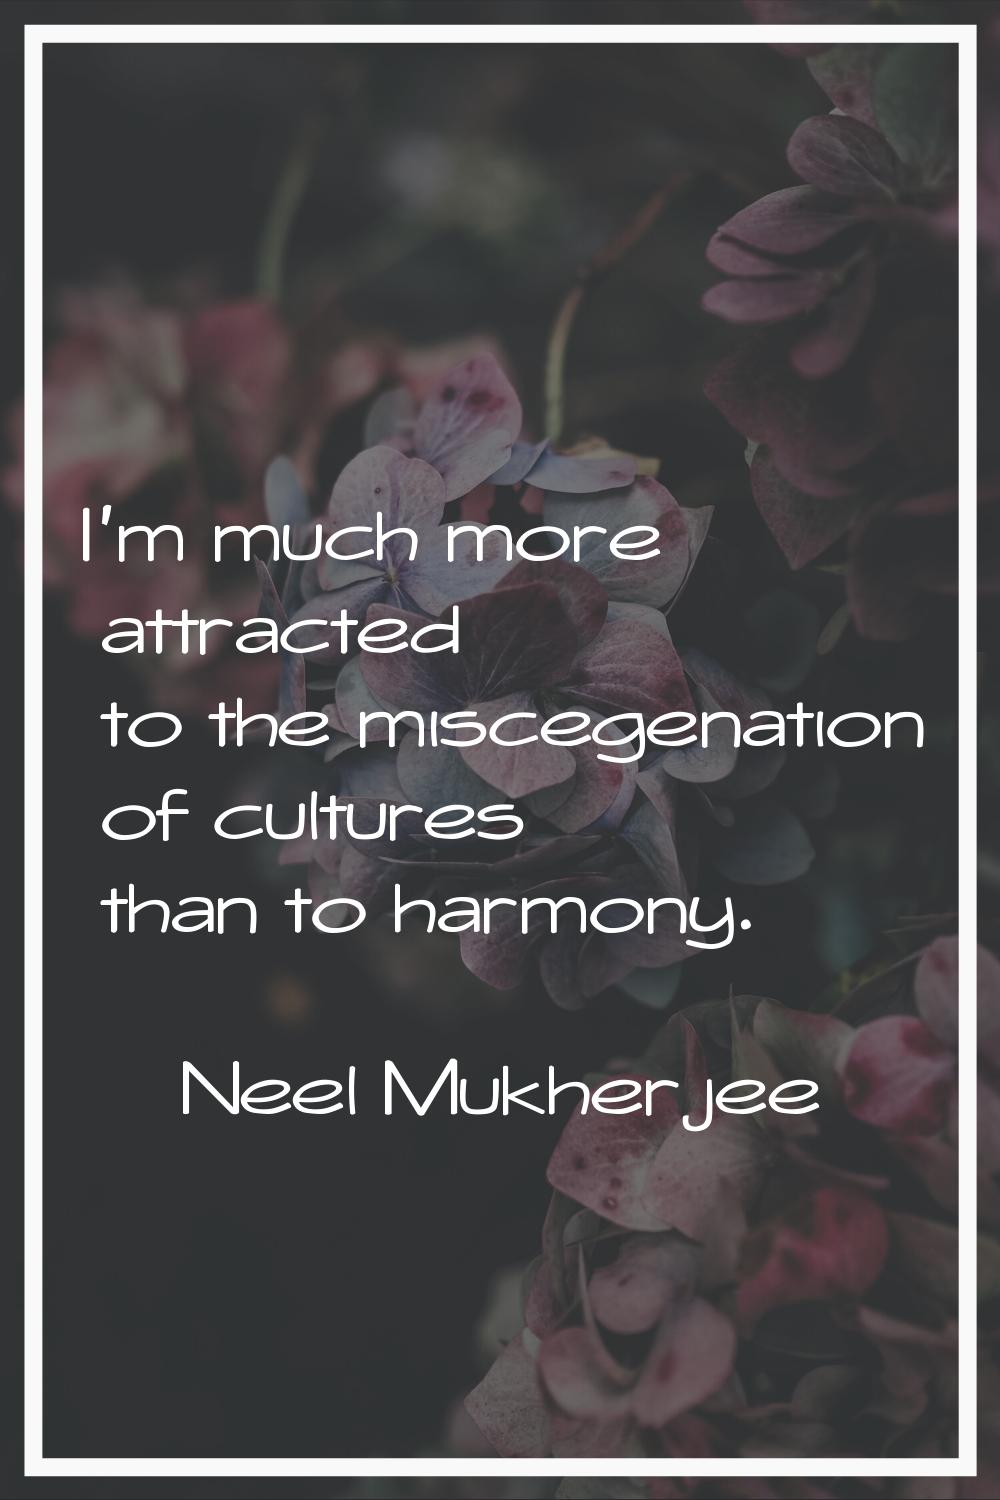 I'm much more attracted to the miscegenation of cultures than to harmony.